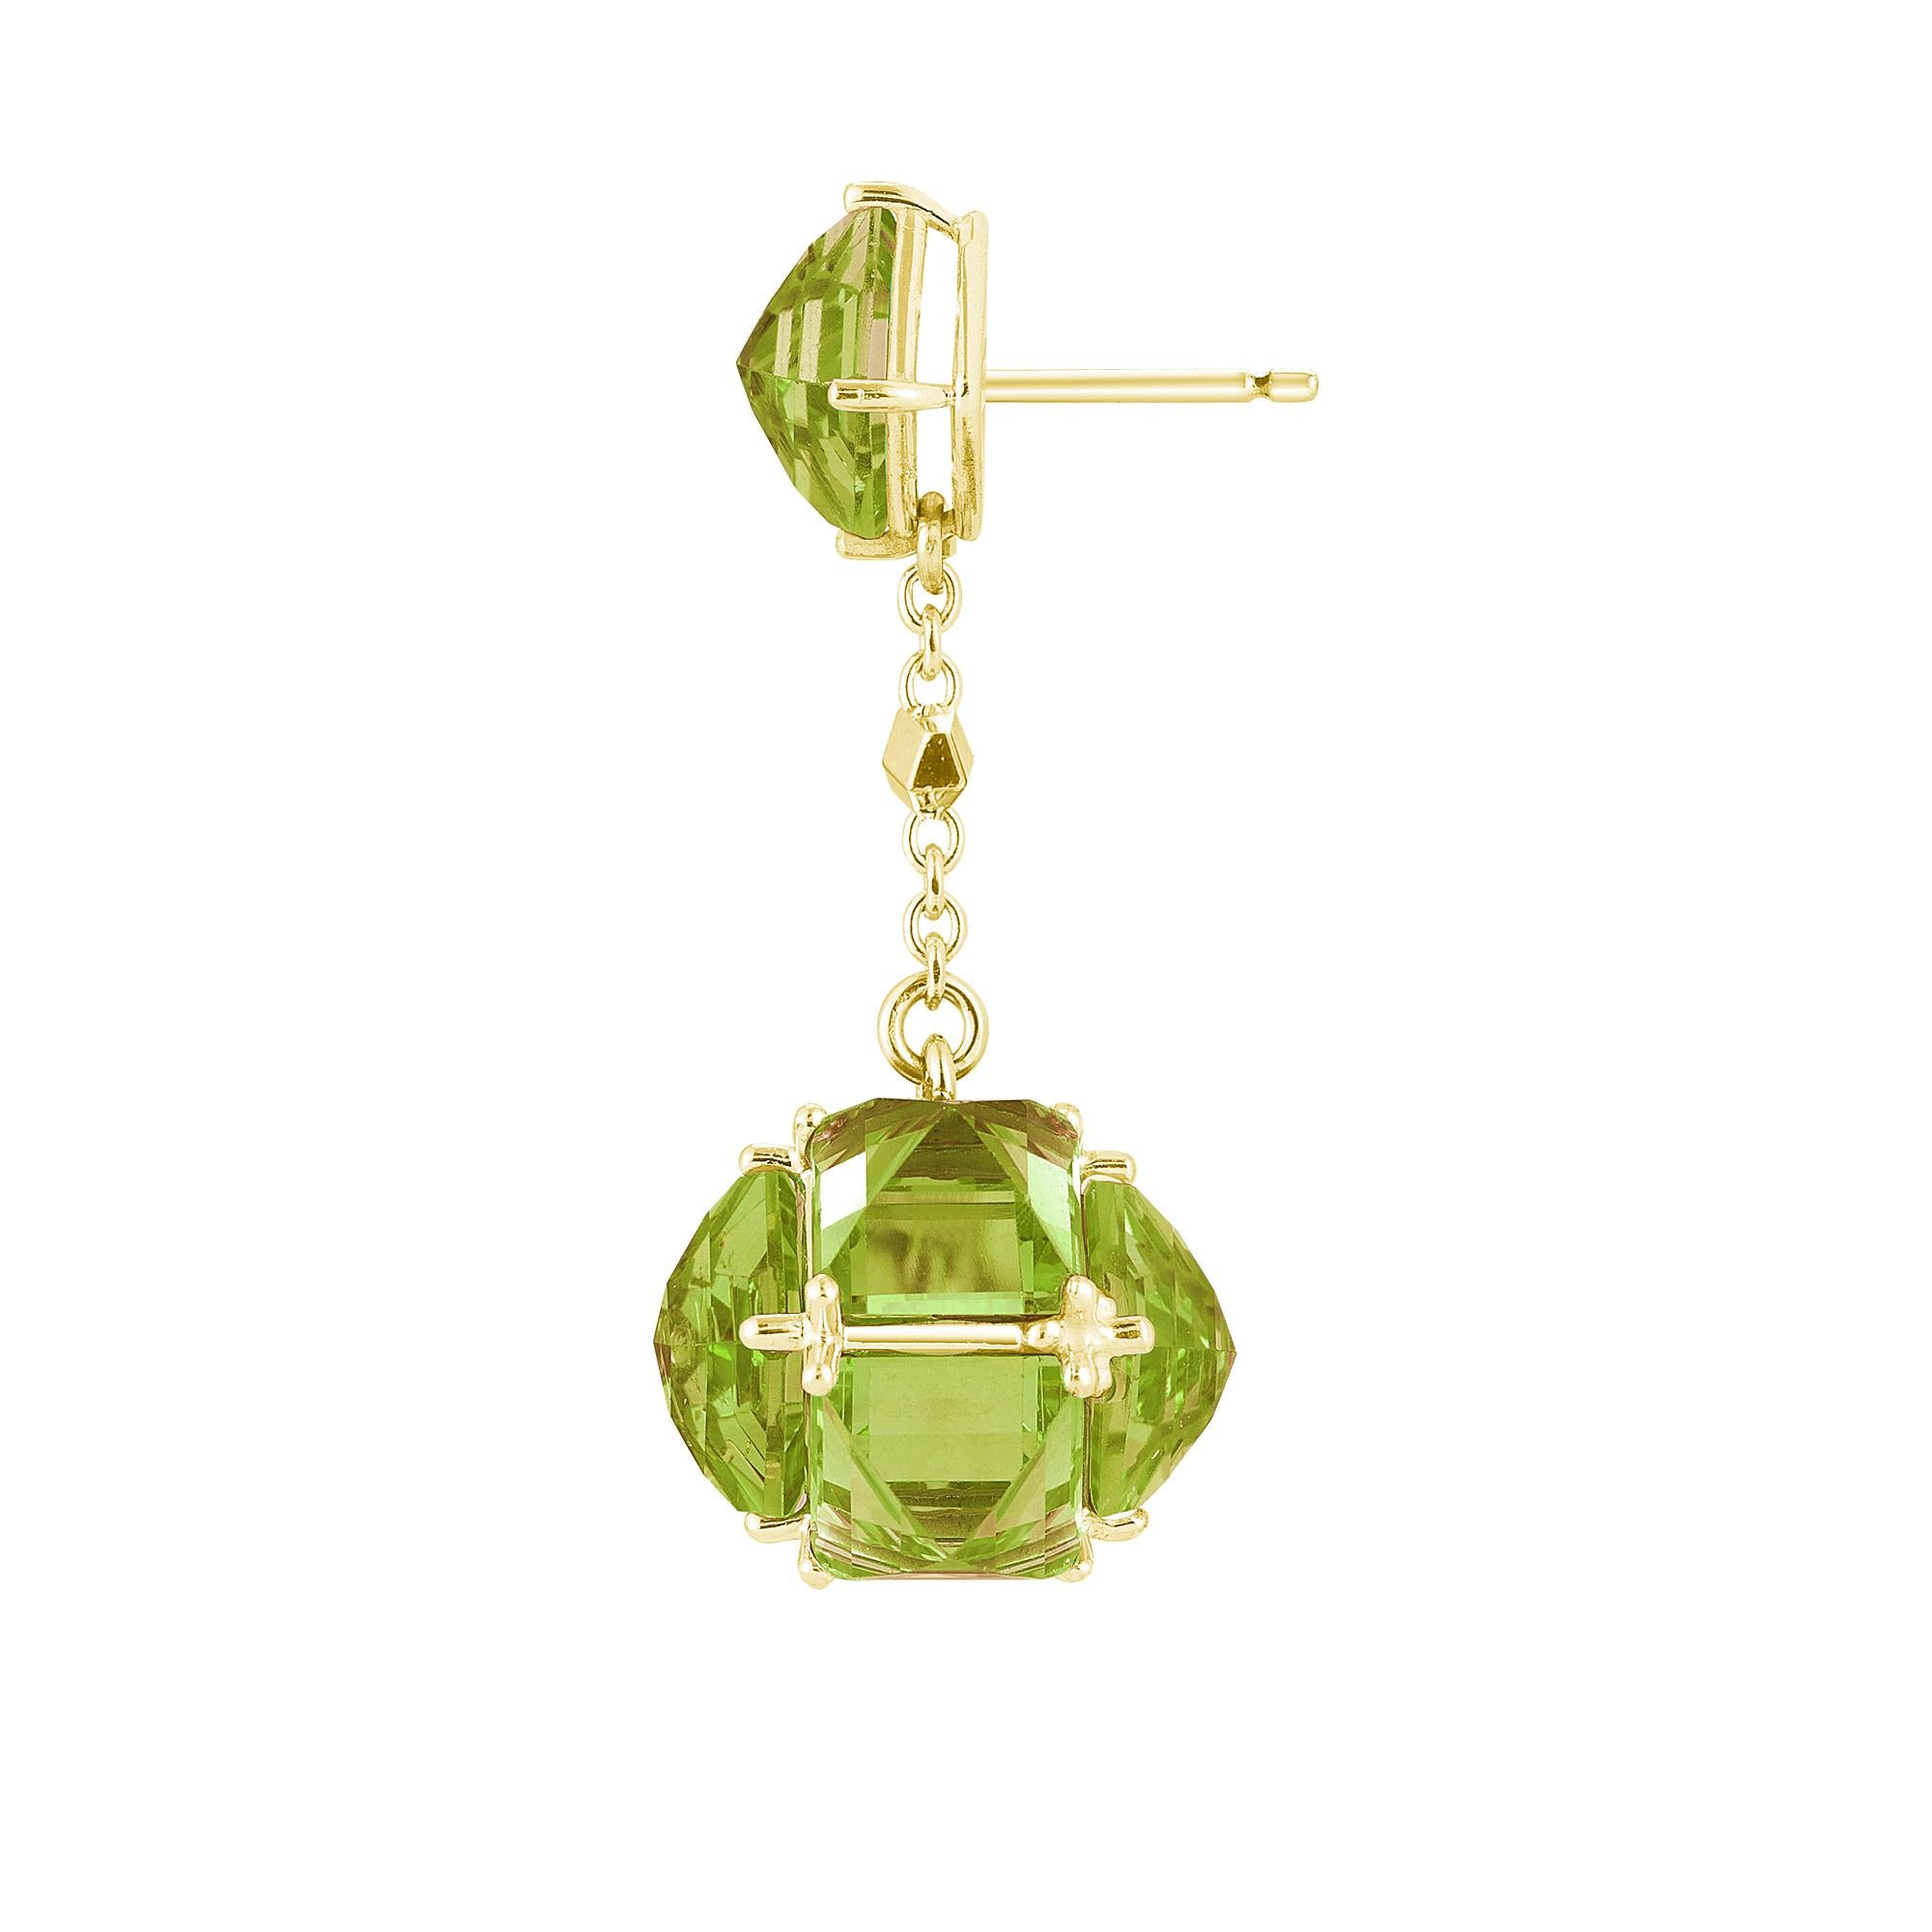 18kt yellow gold Very PC® earrings with reverse set emerald-cut peridots and signature Brillante® motif.

Staying true to Paolo Costagli’s appreciation for modern and clean geometries, the Very PC® collection embodies bold angles of reverse-set